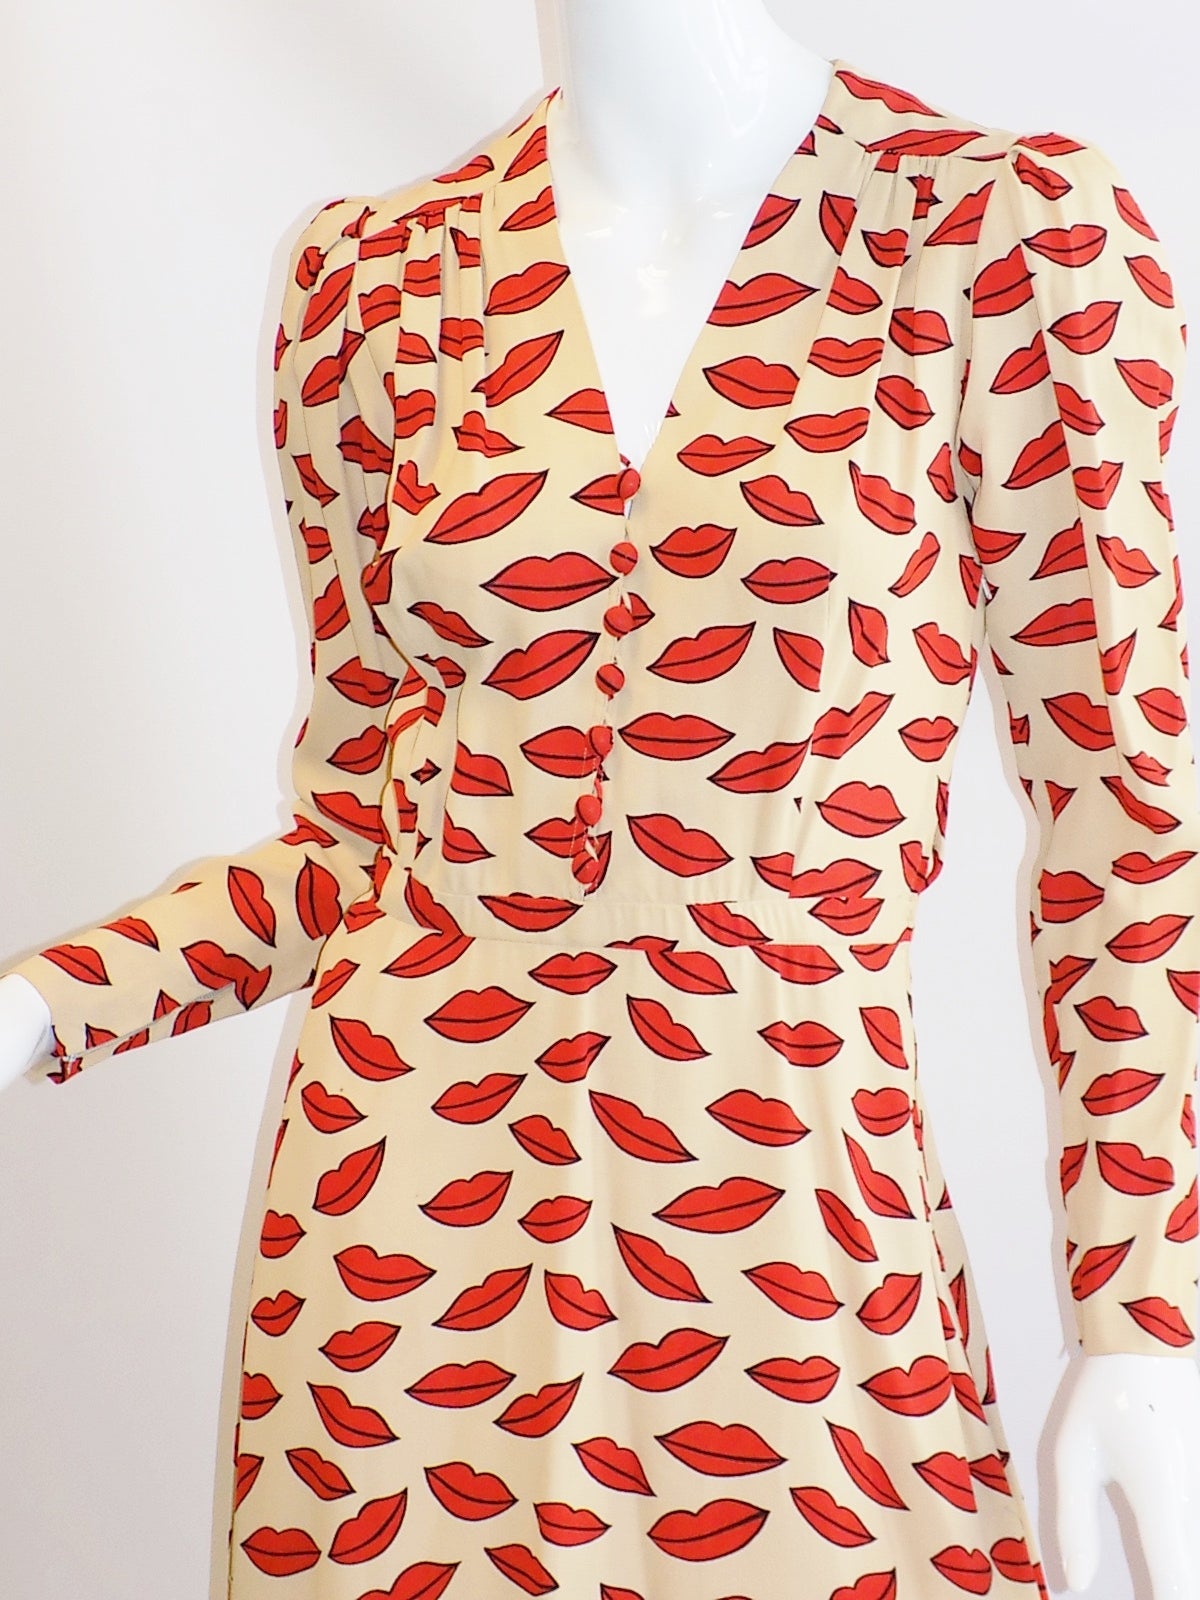 An Yves Saint Laurent 'Lips' print dress, circa 1971, Rive Gauche labelled and size 38, of Ivory  crêpe with zips to cuffs, Side zipper and front loops with covered buttons.  Small size 36. 
Bust 36: waist 26/ Length from the back of the beck to